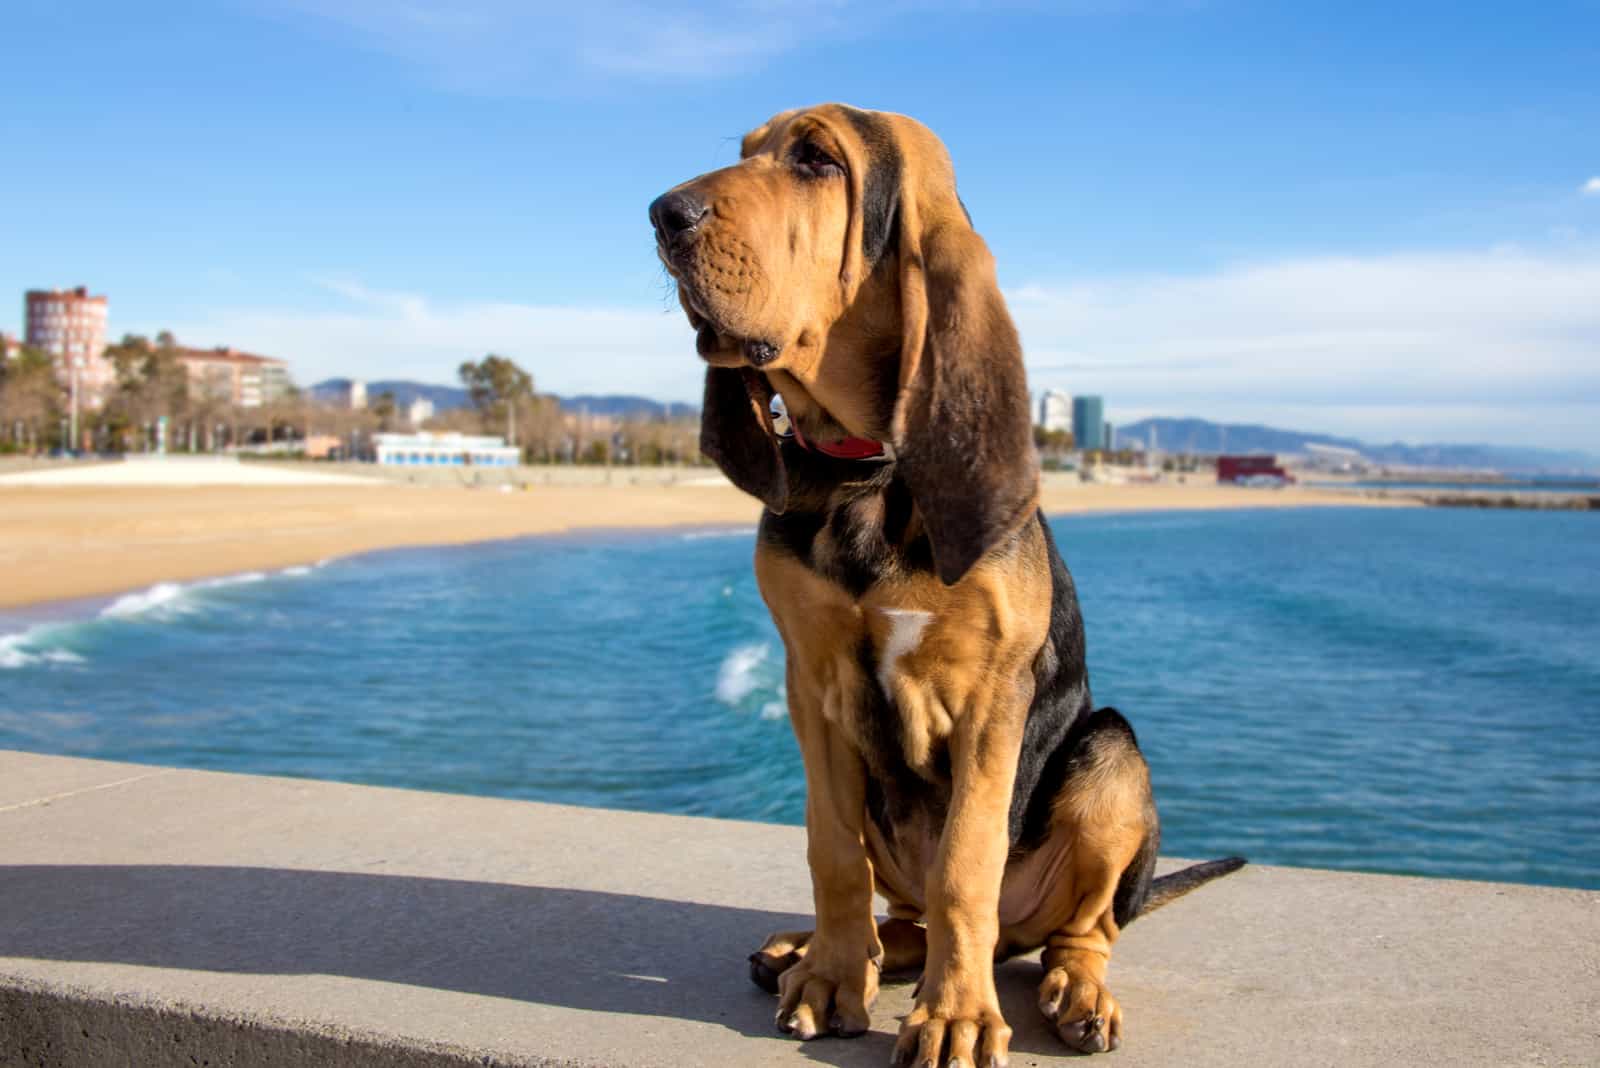 Bloodhound sits by the pool